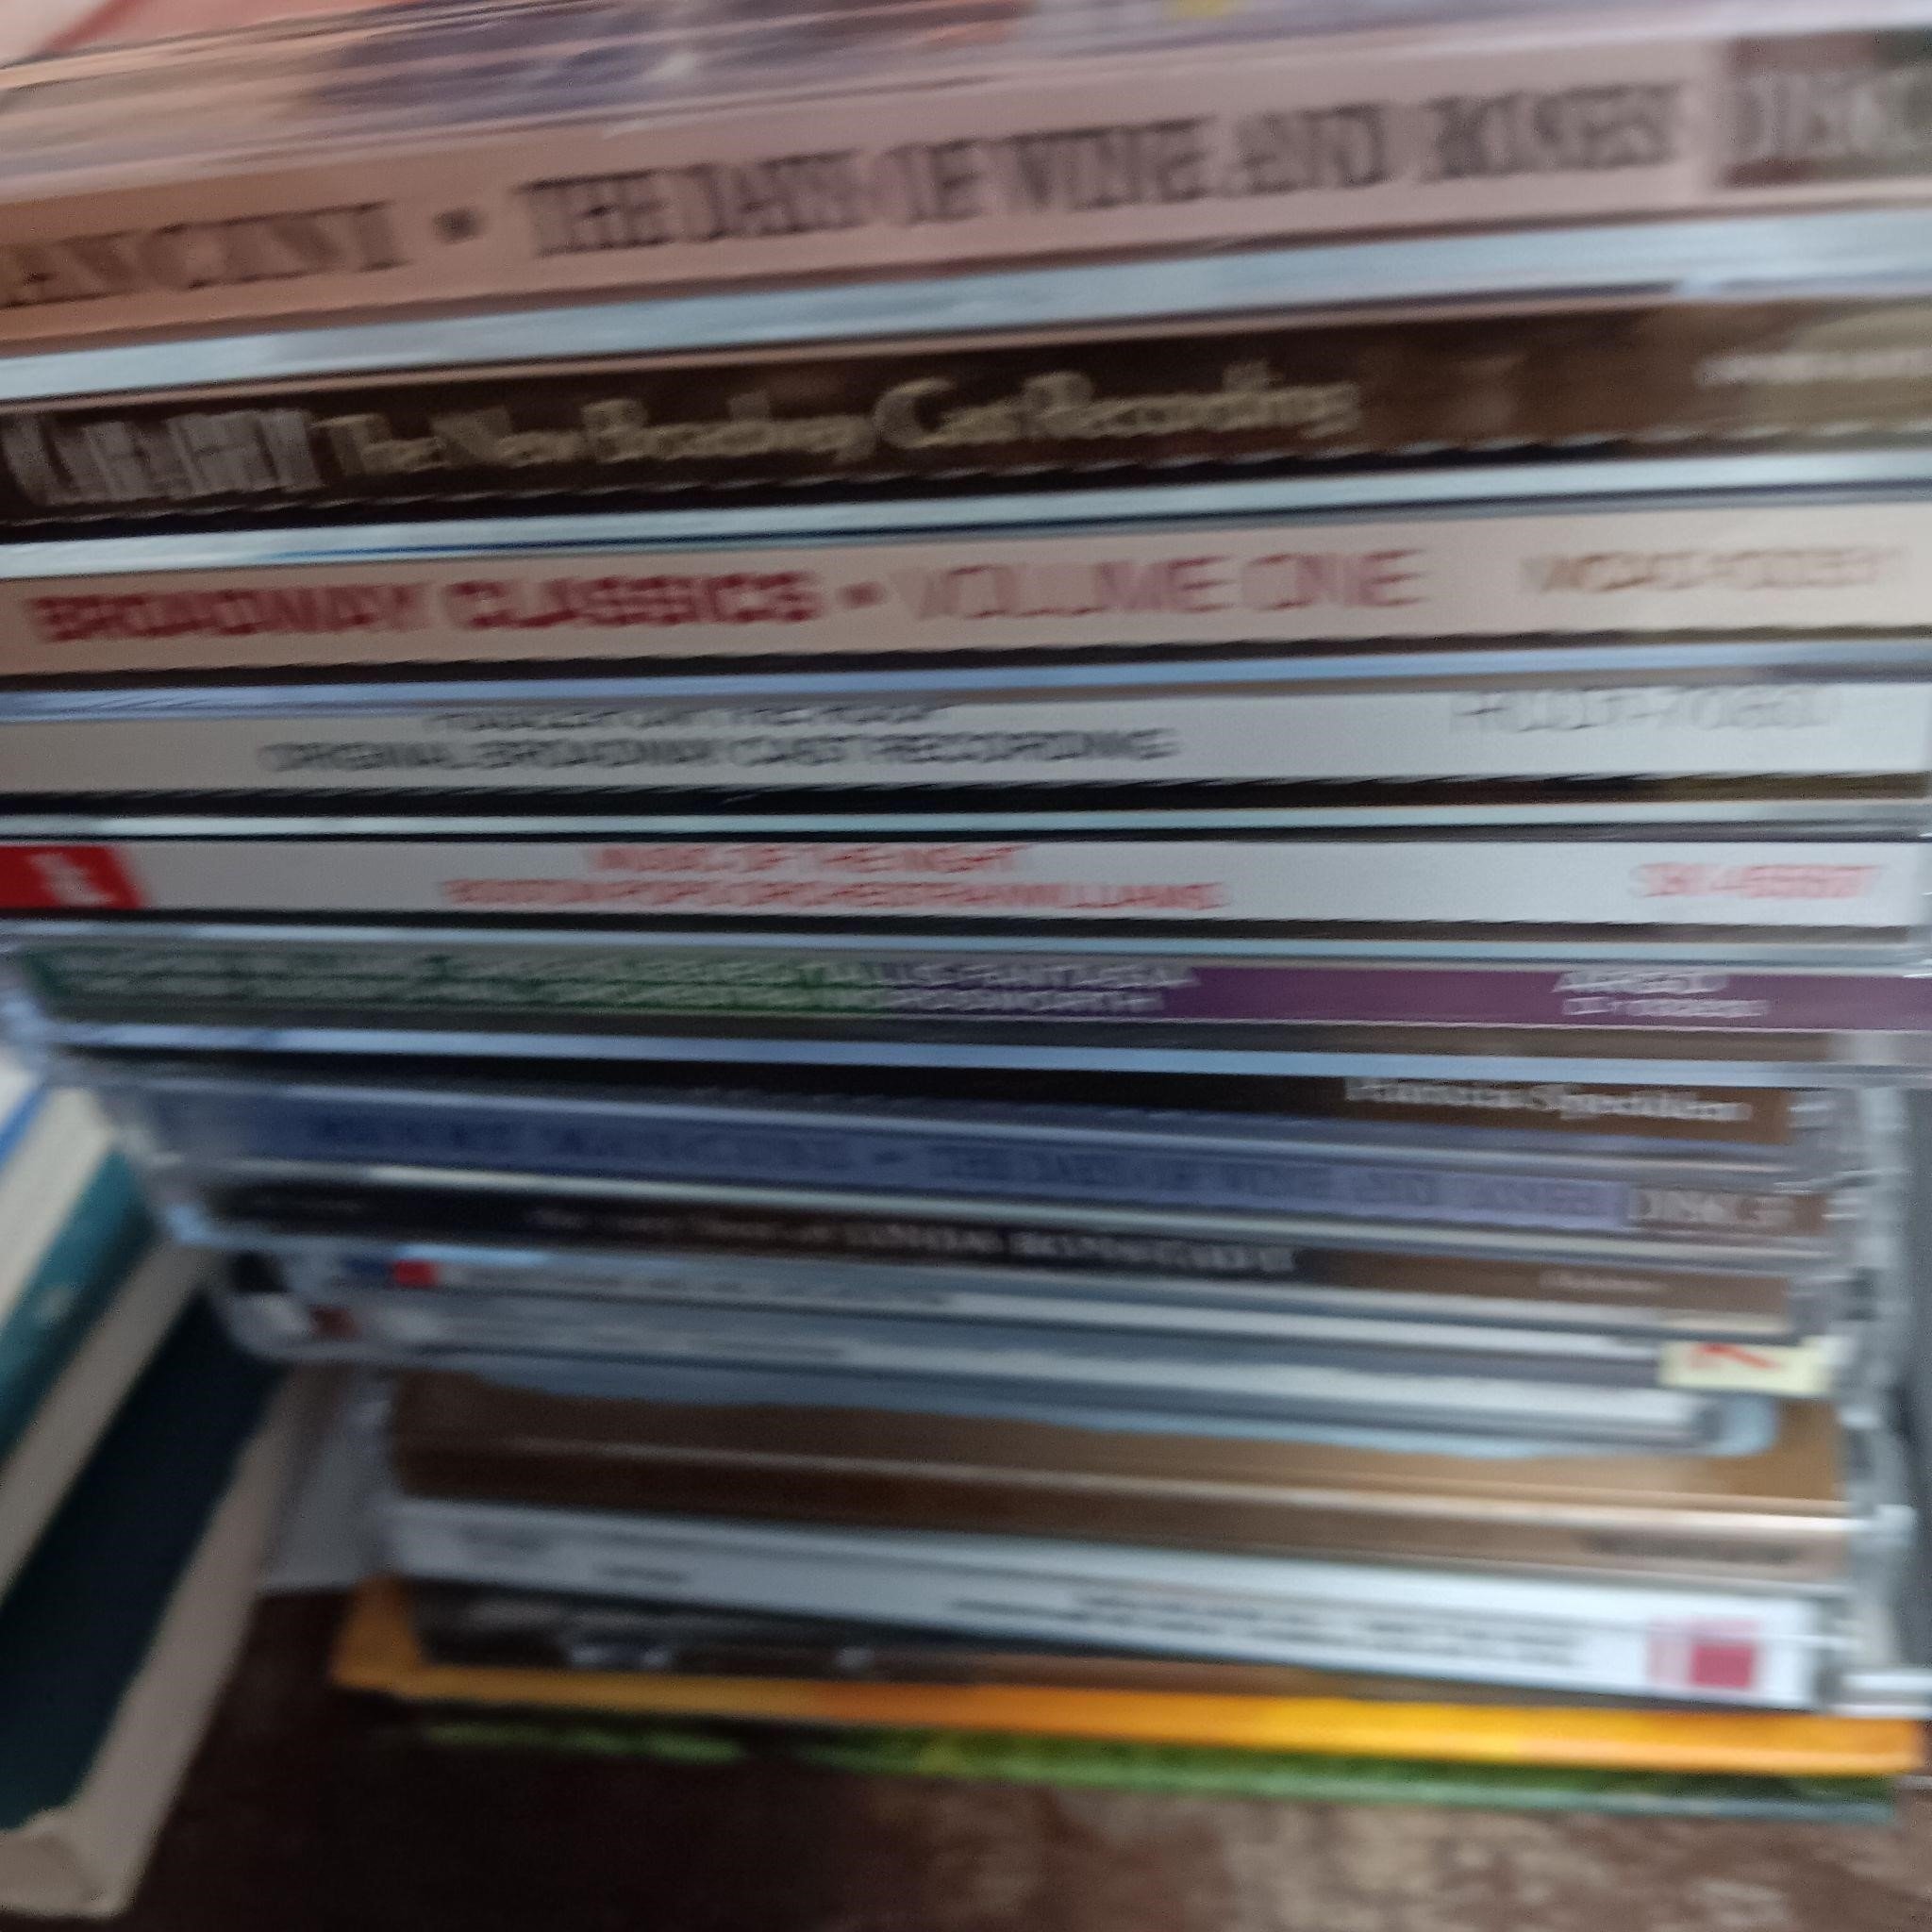 50 Music CDs in cases